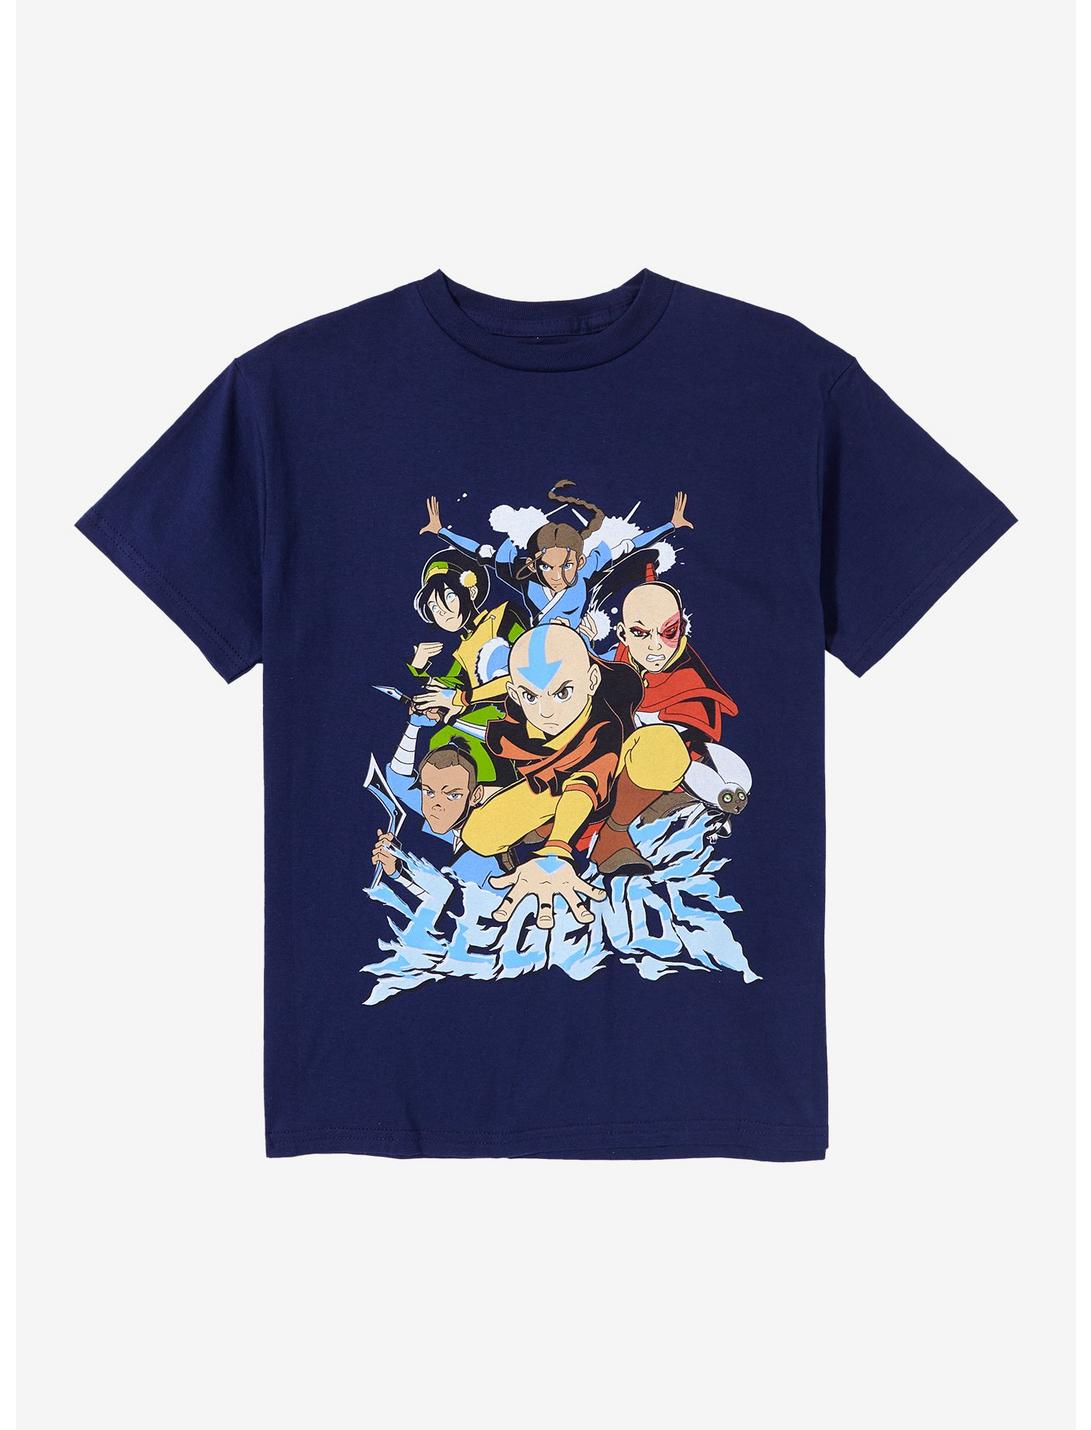 Avatar: The Last Airbender Group Portrait Youth T-Shirt, NAVY, hi-res